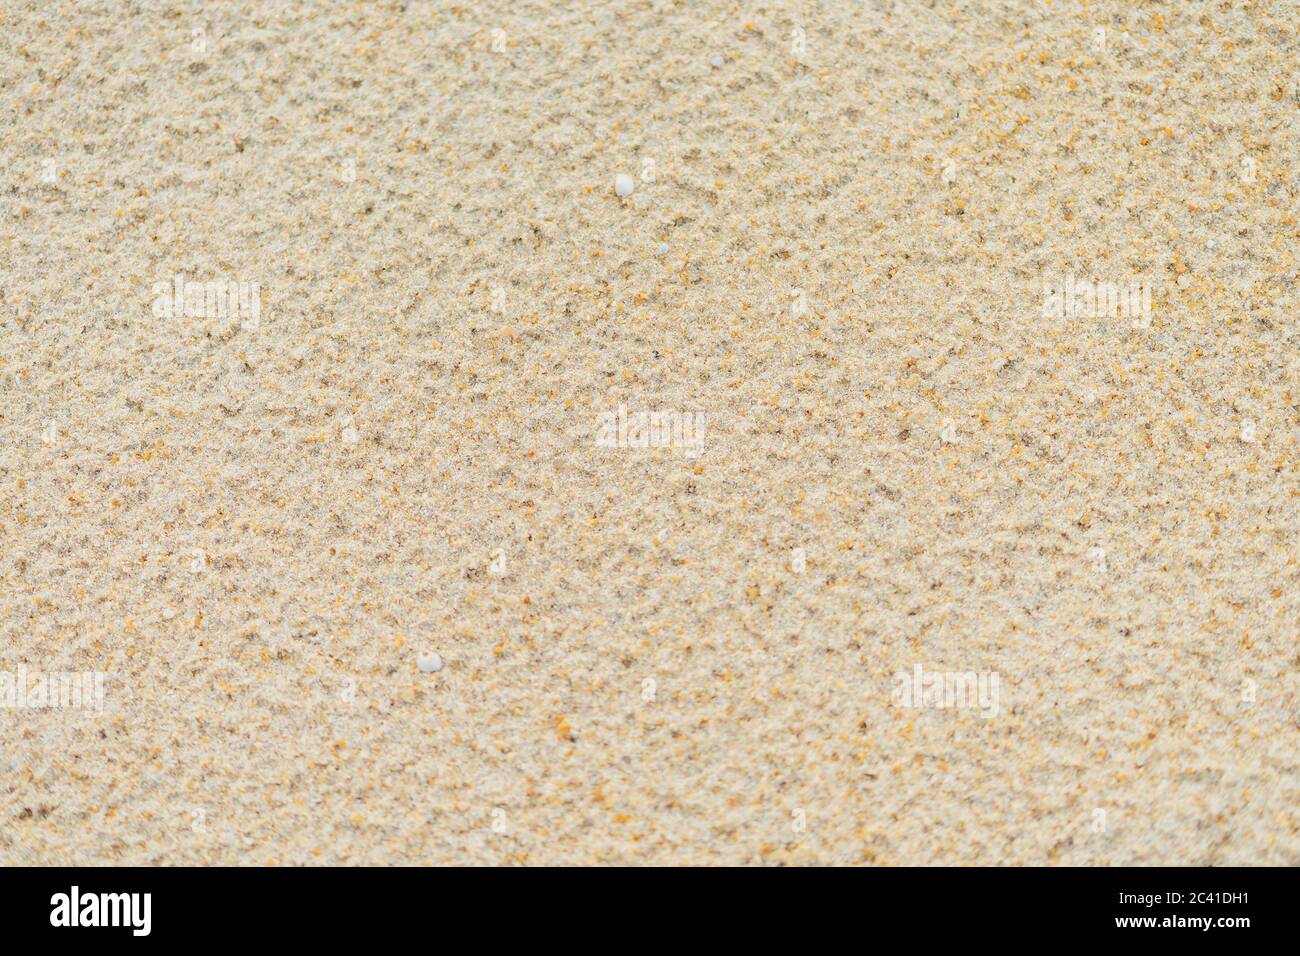 close up sand beach groud floor background for texture Stock Photo - Alamy